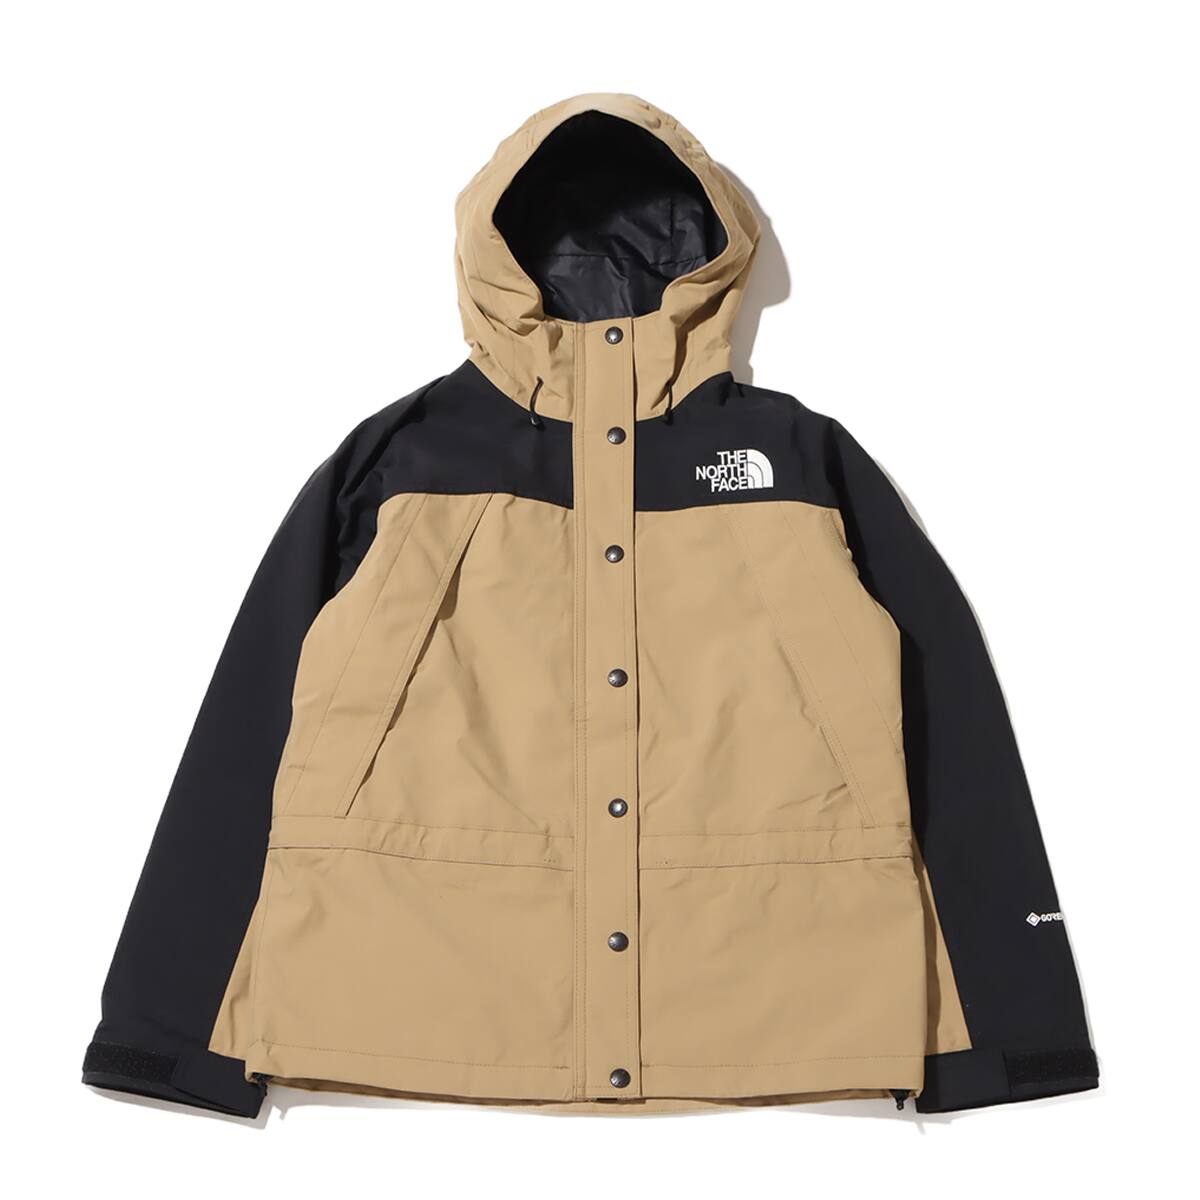 THE NORTH FACE Mountain Light Jacket KT